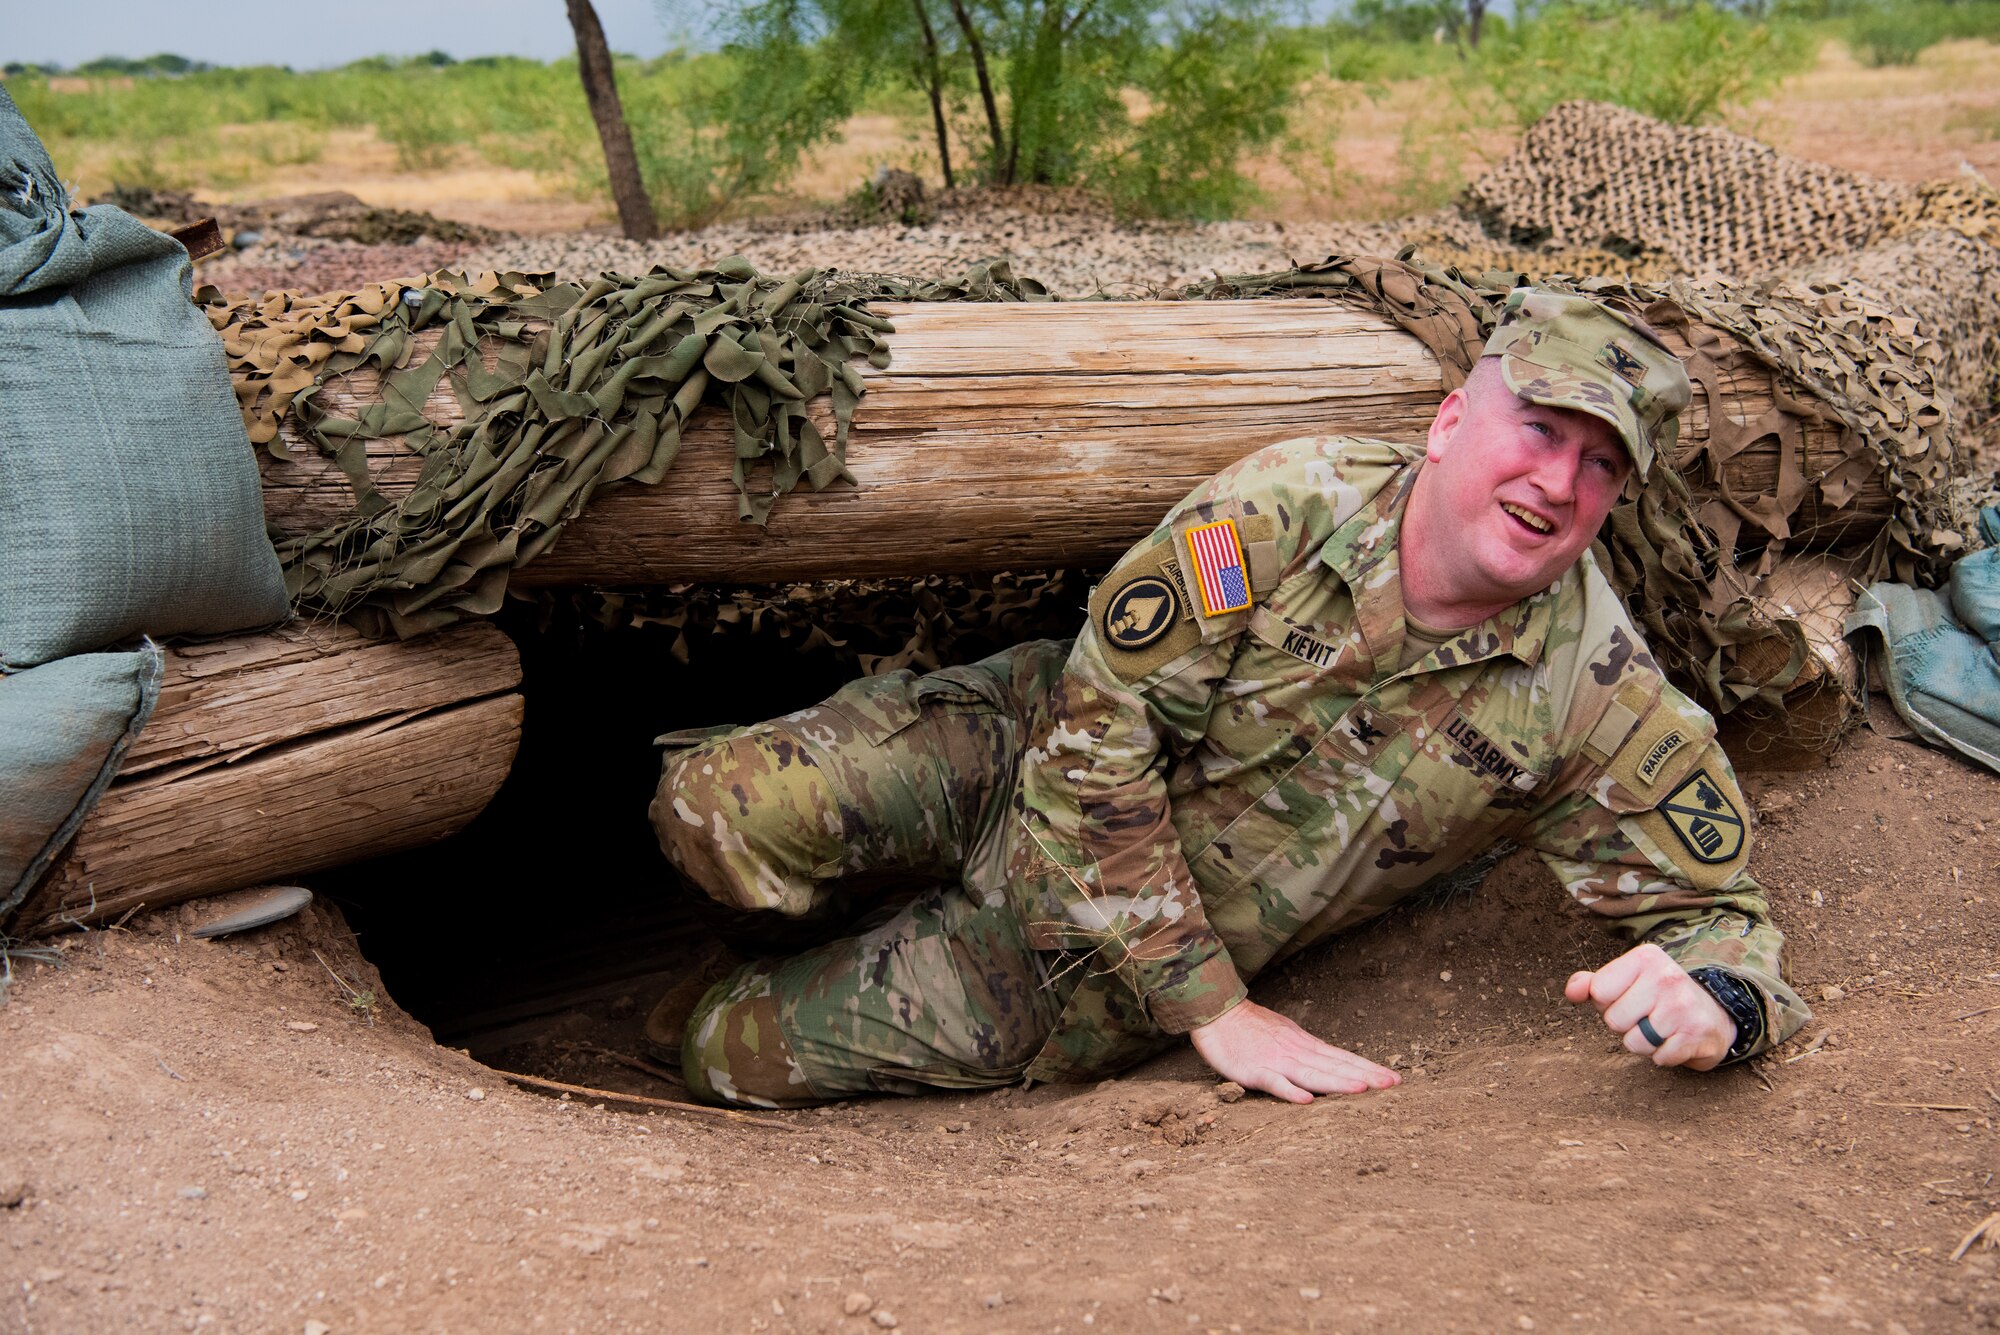 U.S. Army Col. James A. Kievit, Defense Language Institute Foreign Language Center commandant, crawls out of a hidden bunker during a tour of Forward Operating Base Sentinel, at Goodfellow Air Force Base, Texas, July 12, 2022. Students of the 344th Military Intelligence Battalion are tasked to find the source of various signals hidden across FOB Sentinel during their capstone exercise. (U.S. Air Force photo by Senior Airman Michael Bowman)